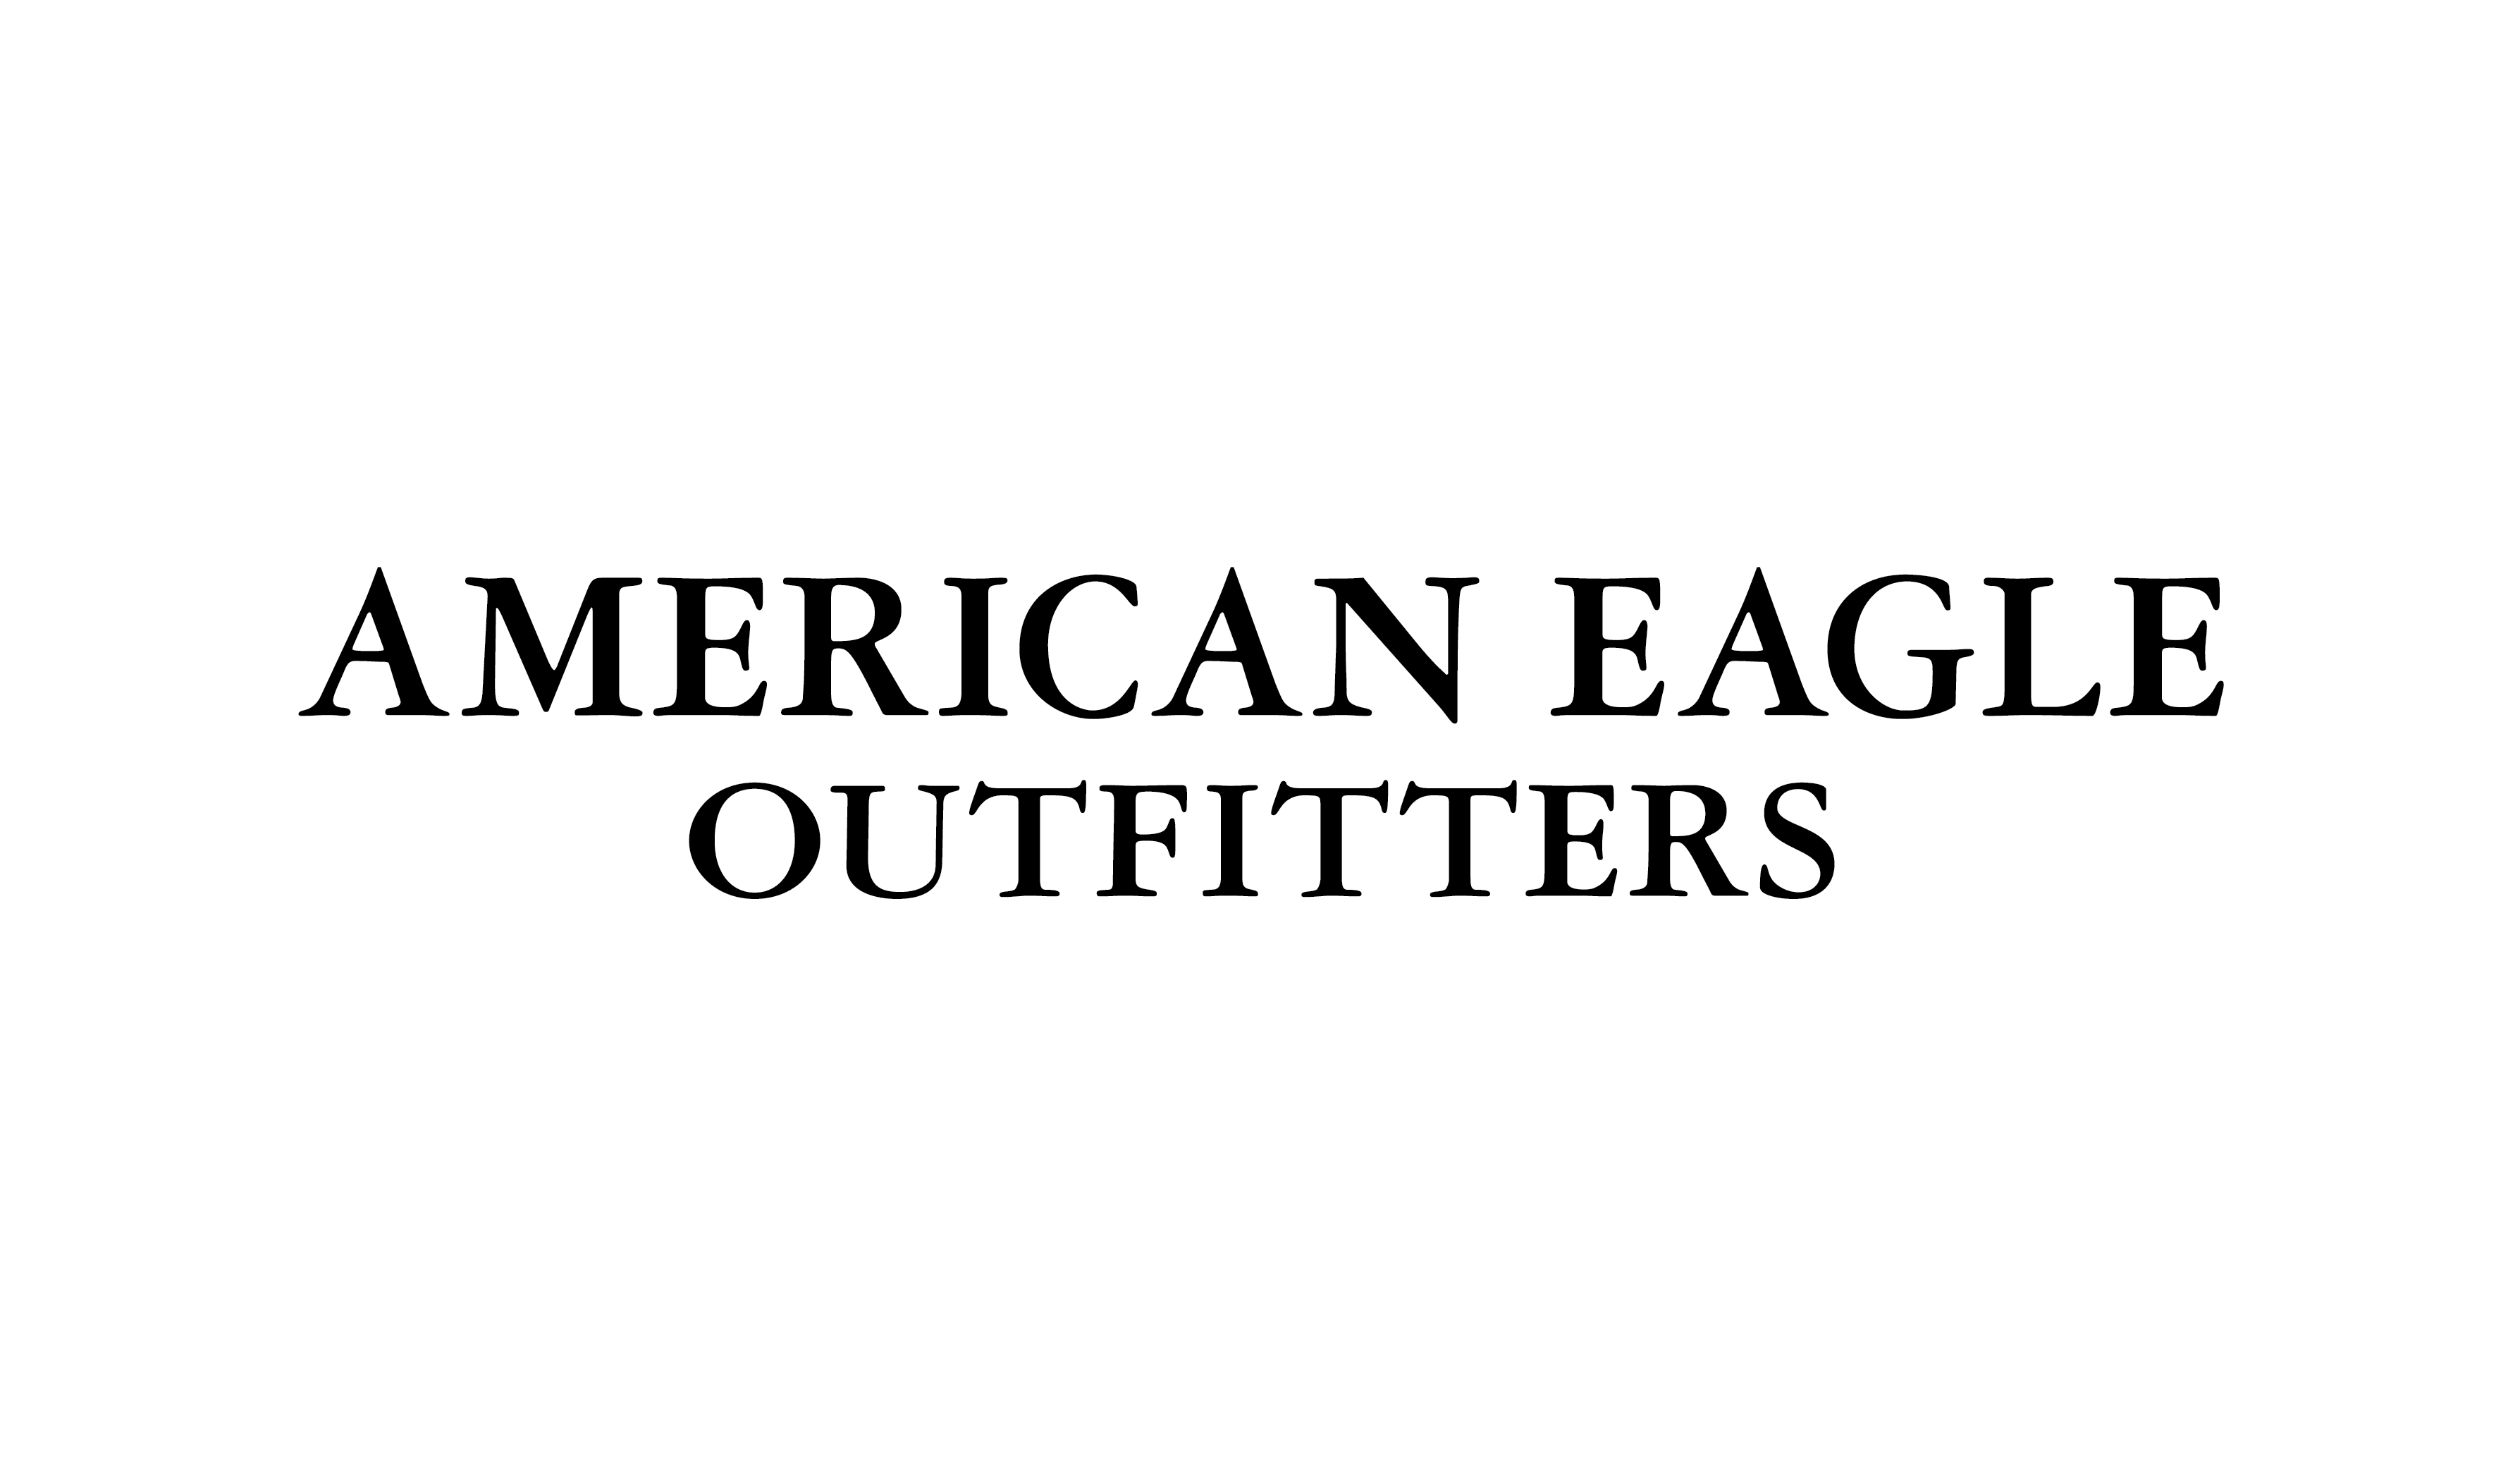 American Eagle Outfitters Logo - American Eagle Outfitters. The Avenue Murfreesboro